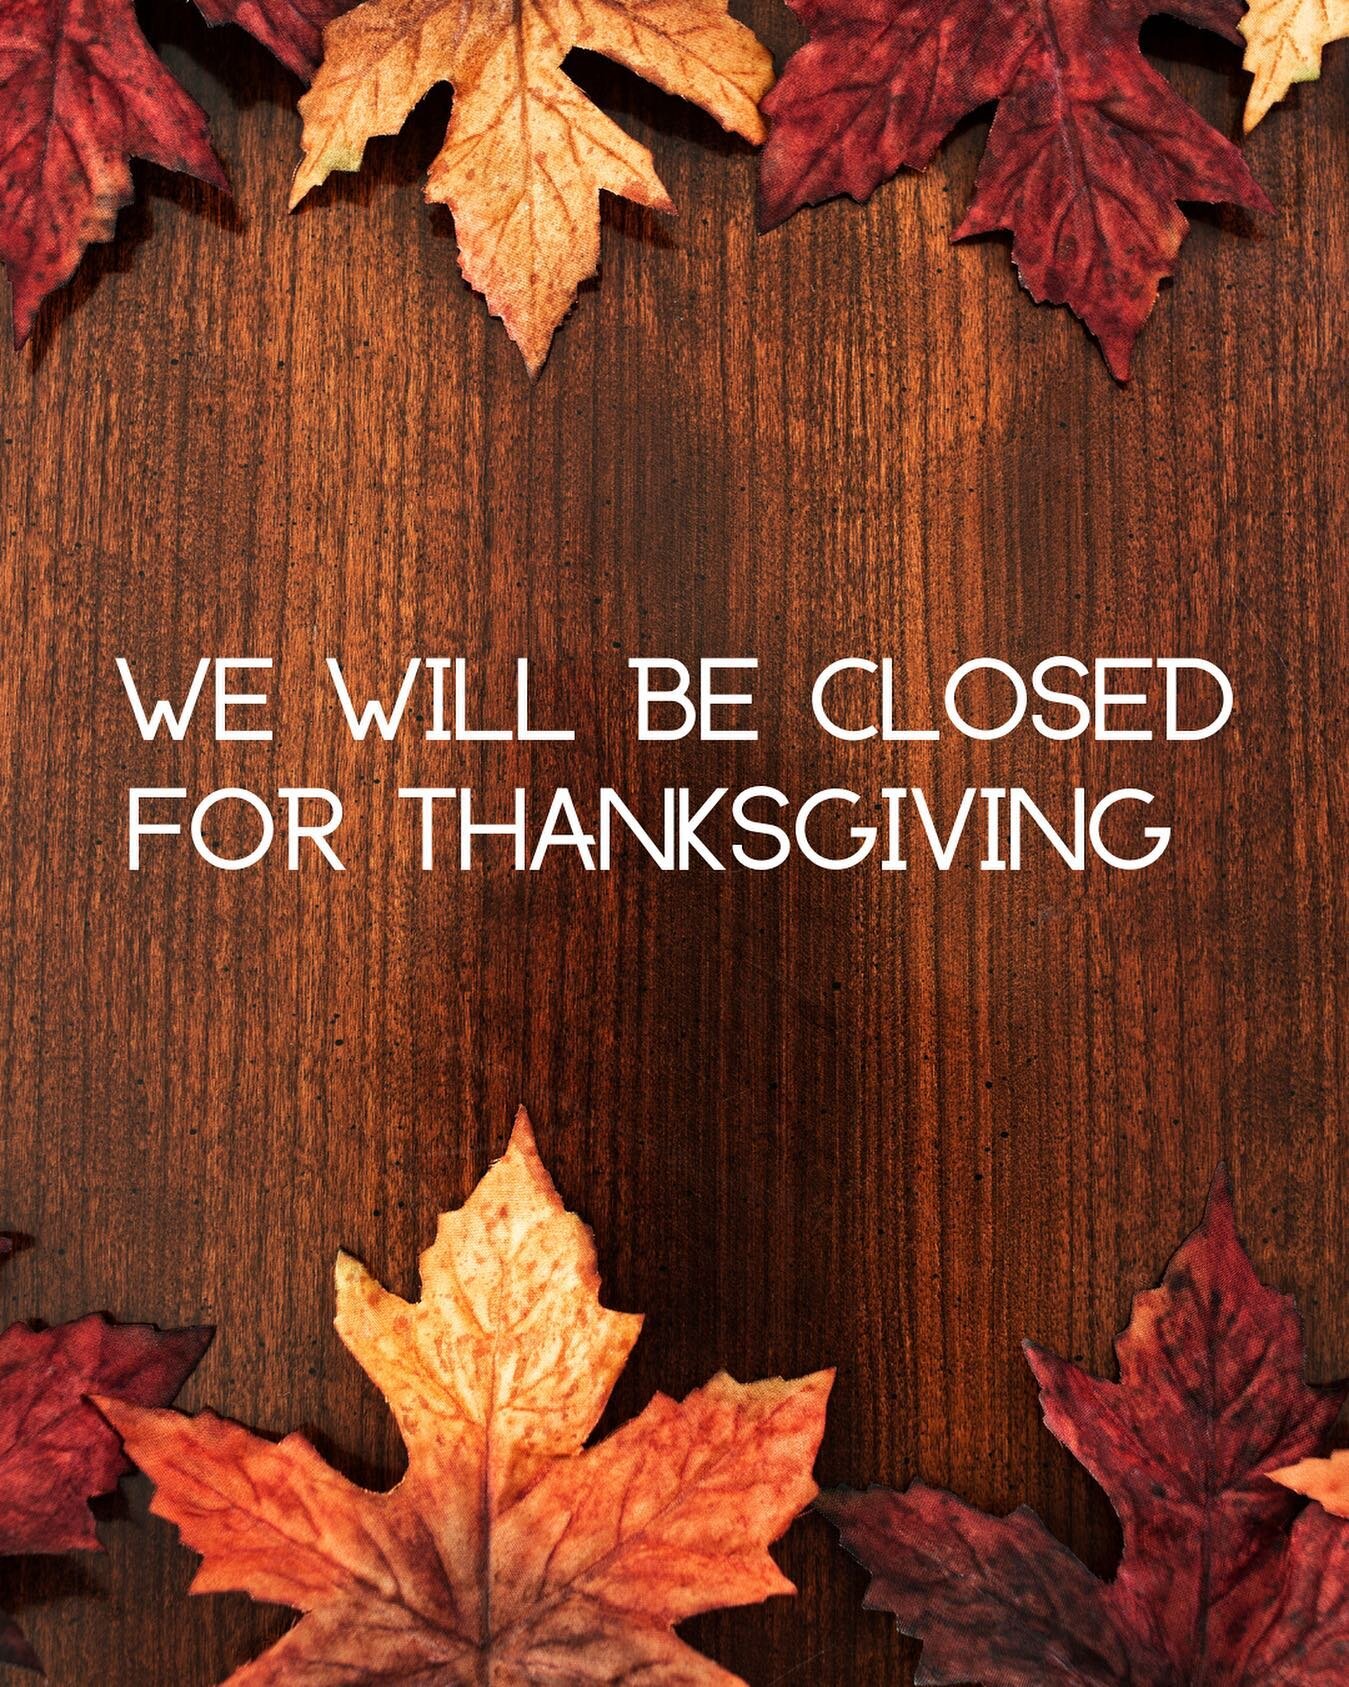 We will be closed Thursday the 23rd for Thanksgiving. Hope you all enjoy your holiday🦃  We will resume regular operating hours Friday the 24th!